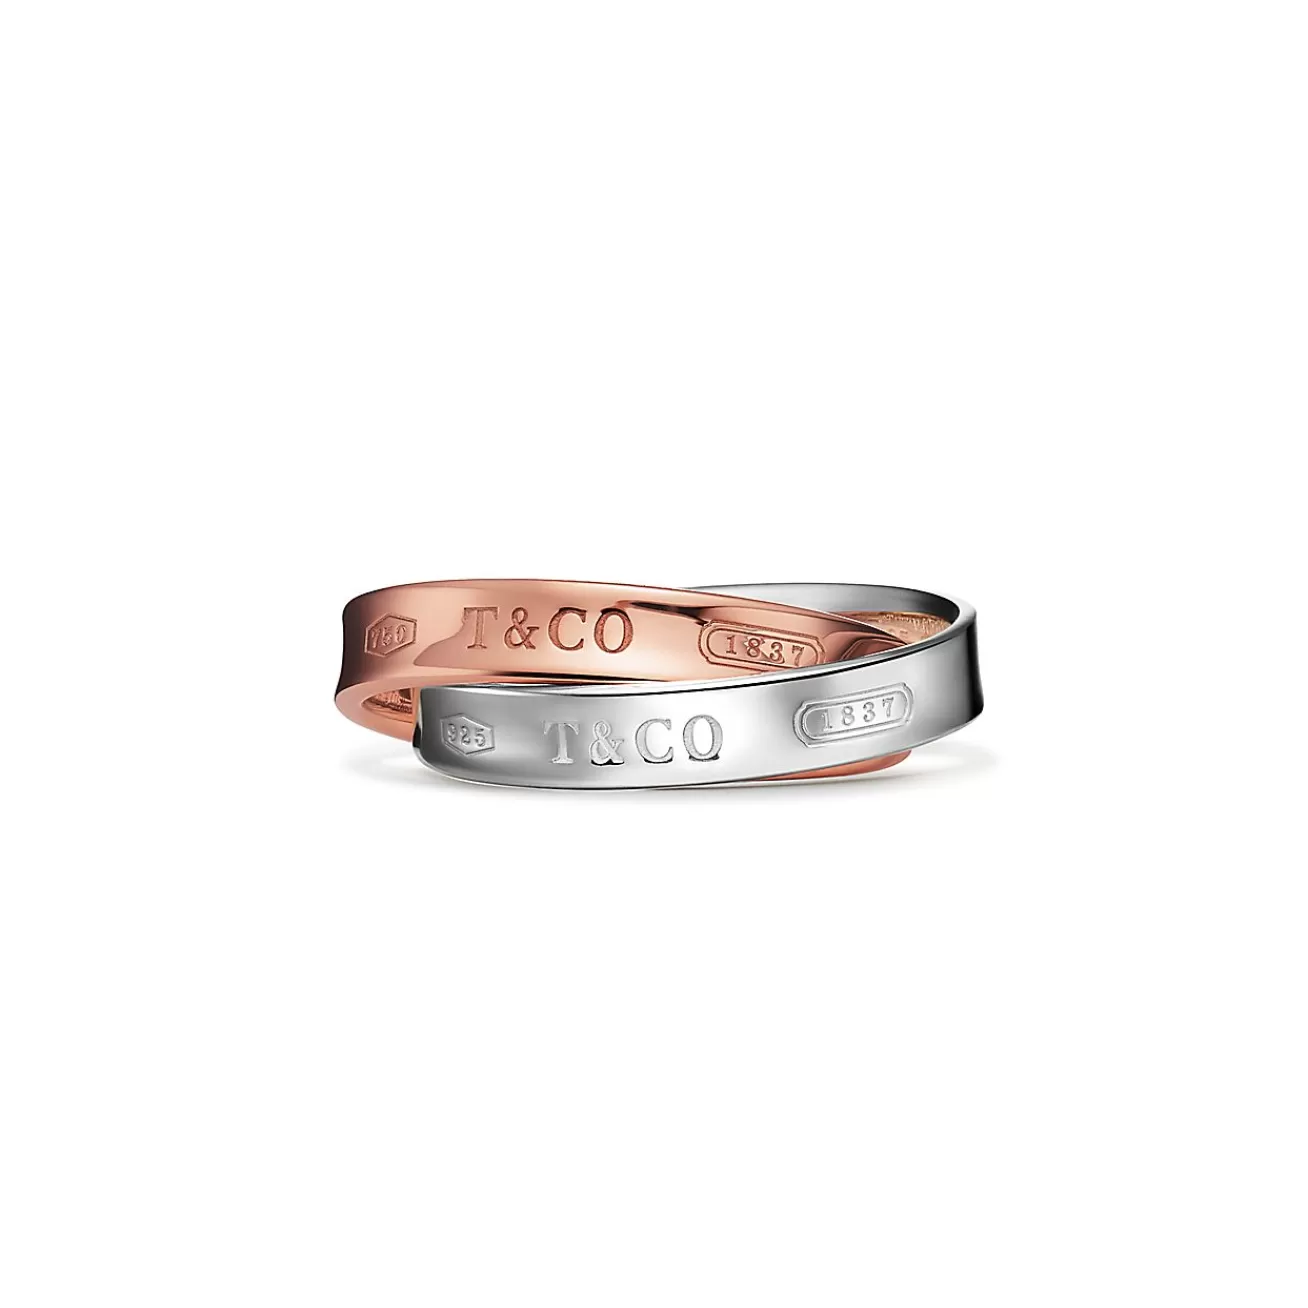 Tiffany & Co. Tiffany 1837® Interlocking Circles Ring in Rose Gold and Sterling Silver | ^ Rings | New Jewelry